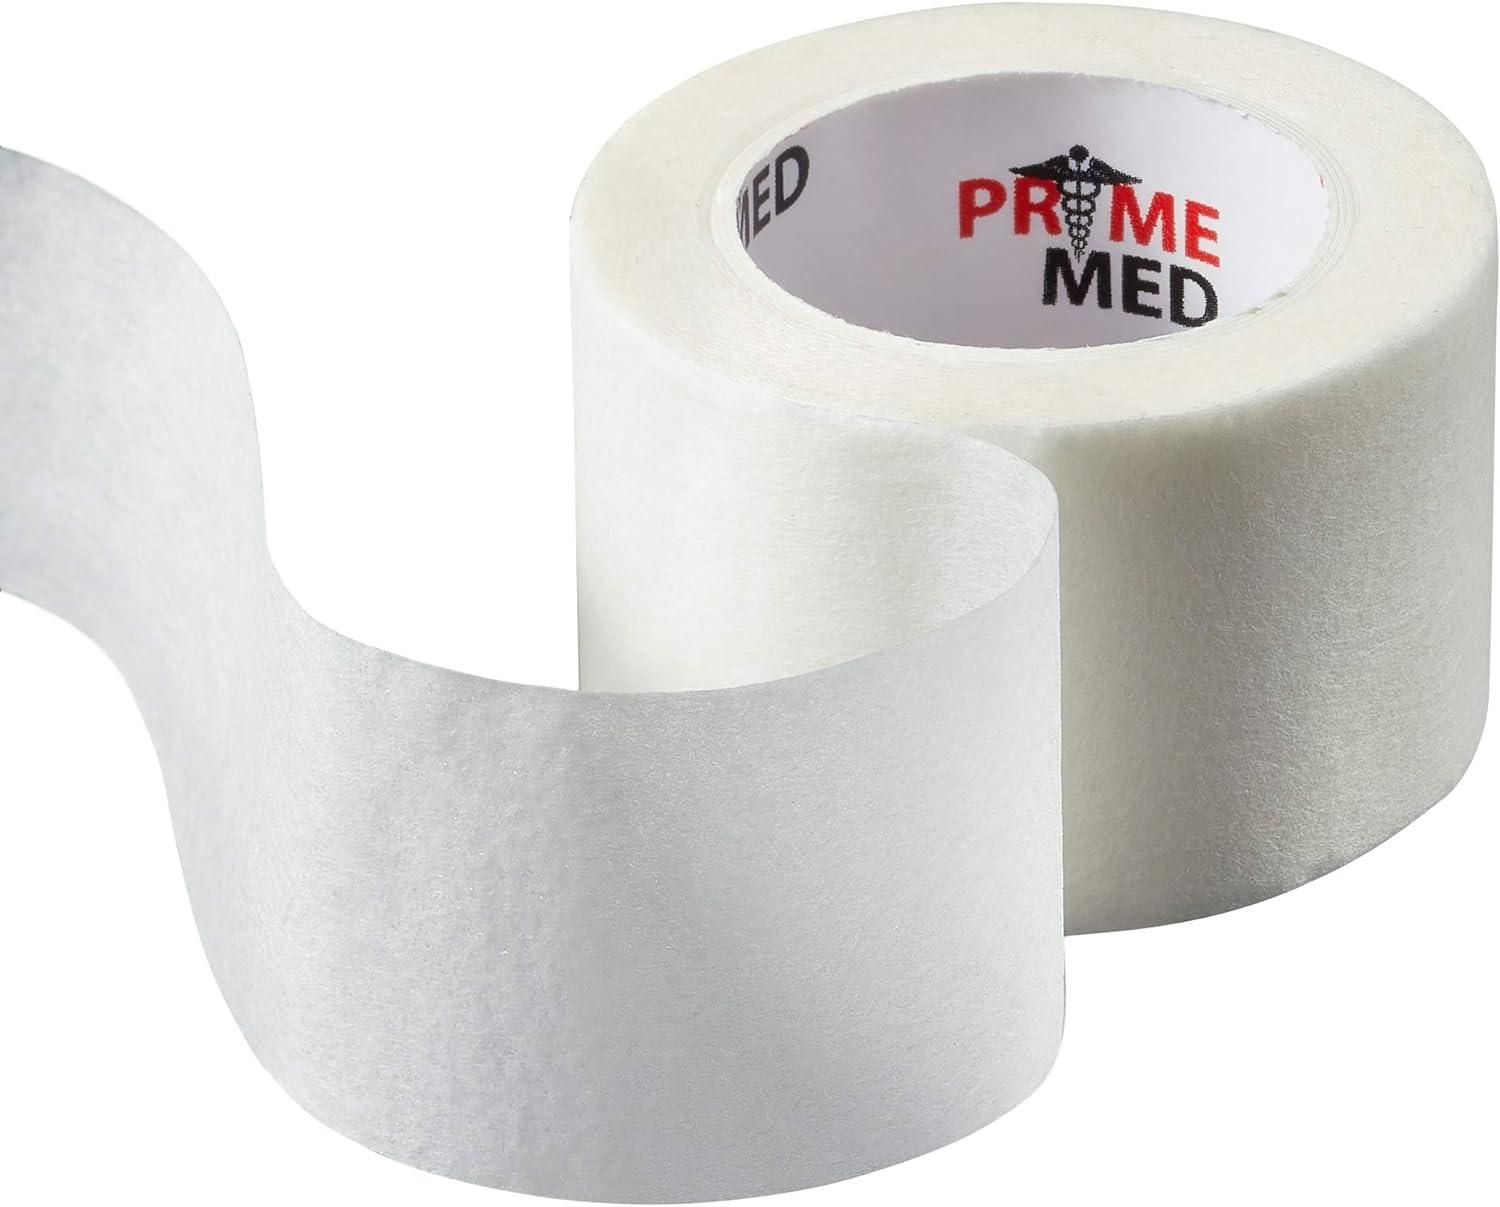 3M Micropore Skin Friendly Paper Medical Tape, 1 Inch X 10 Yards, Box of 12